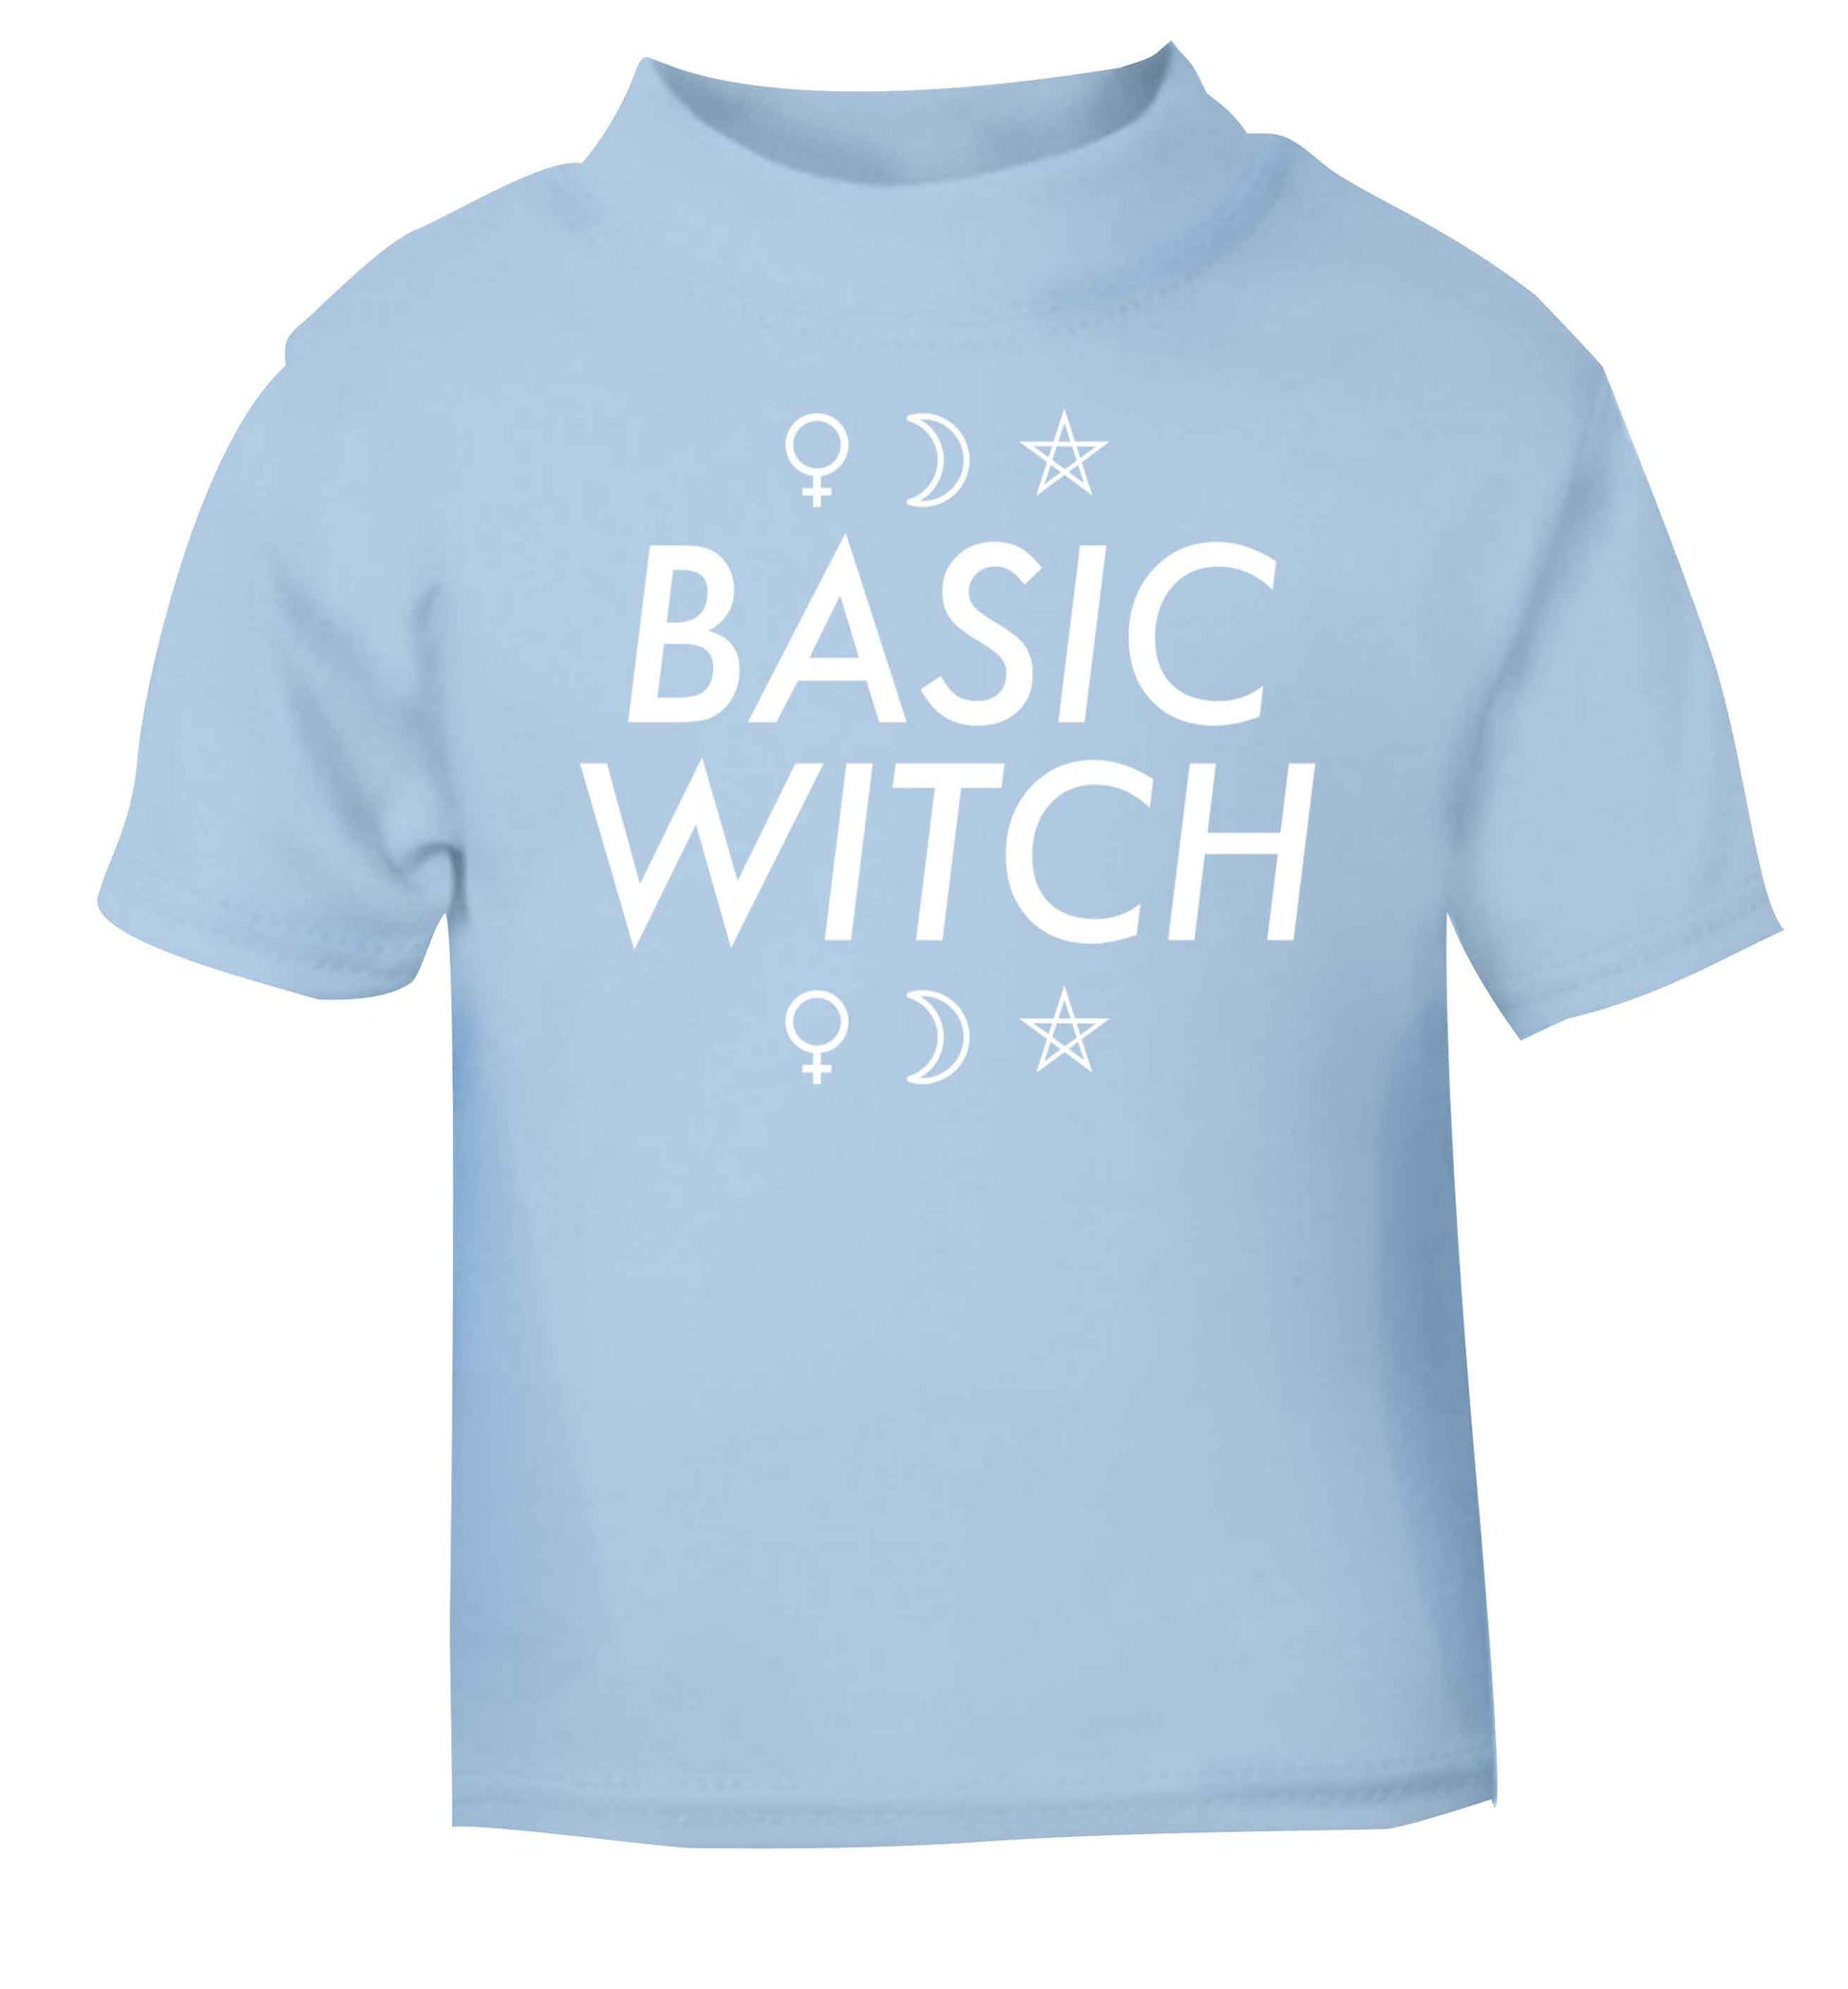 Basic witch 1 light blue baby toddler Tshirt 2 Years